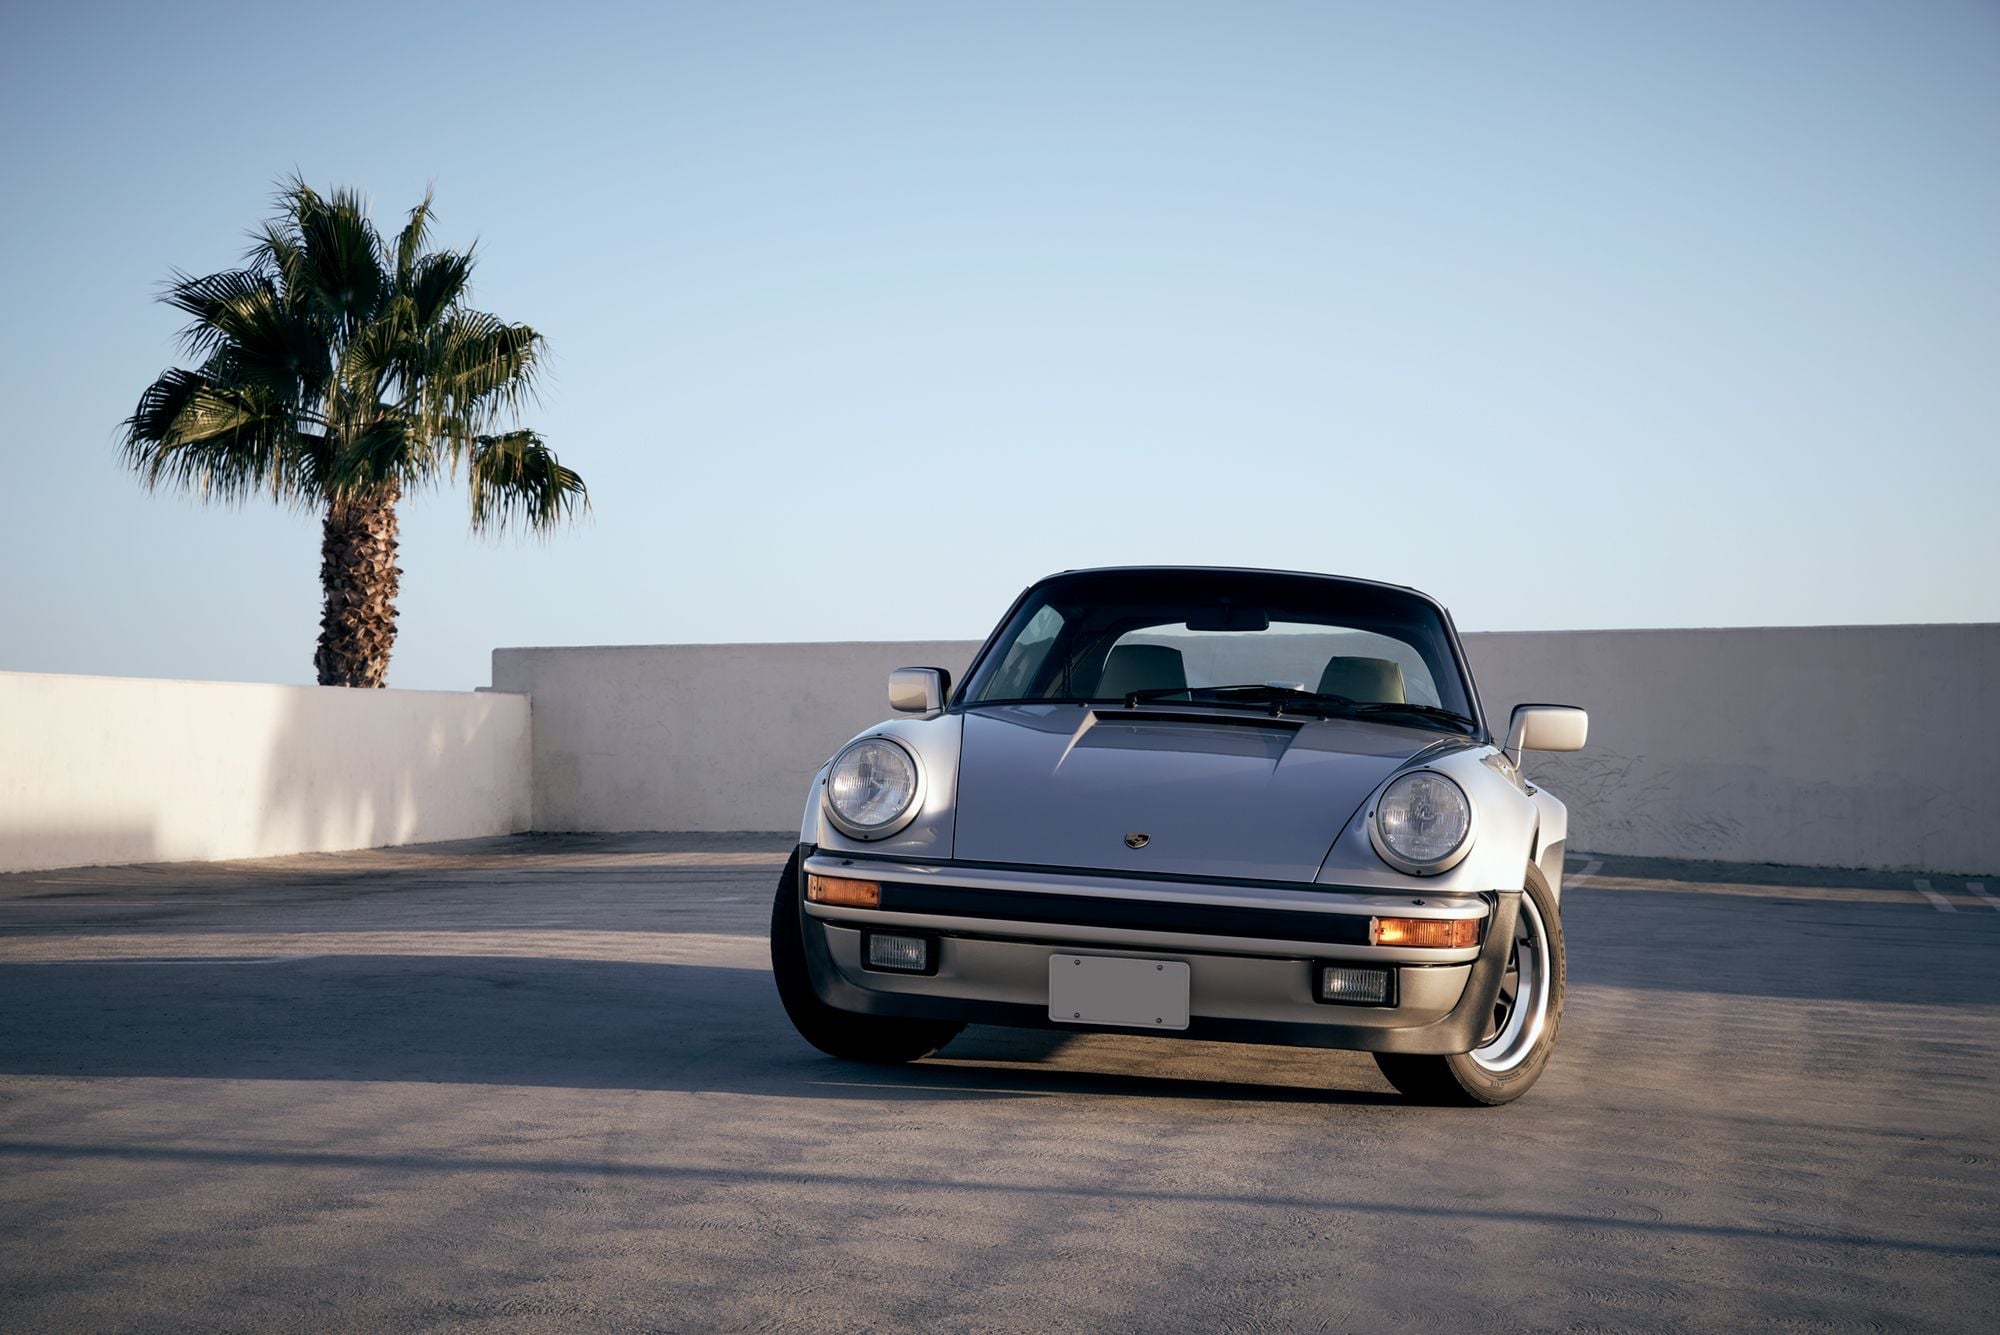 1989 Porsche 911 - Once in a Lifetime Opportunity - Used - VIN WP0EB0935KS070551 - 13,500 Miles - 6 cyl - 2WD - Manual - Convertible - Other - Ventura, CA 93003, United States